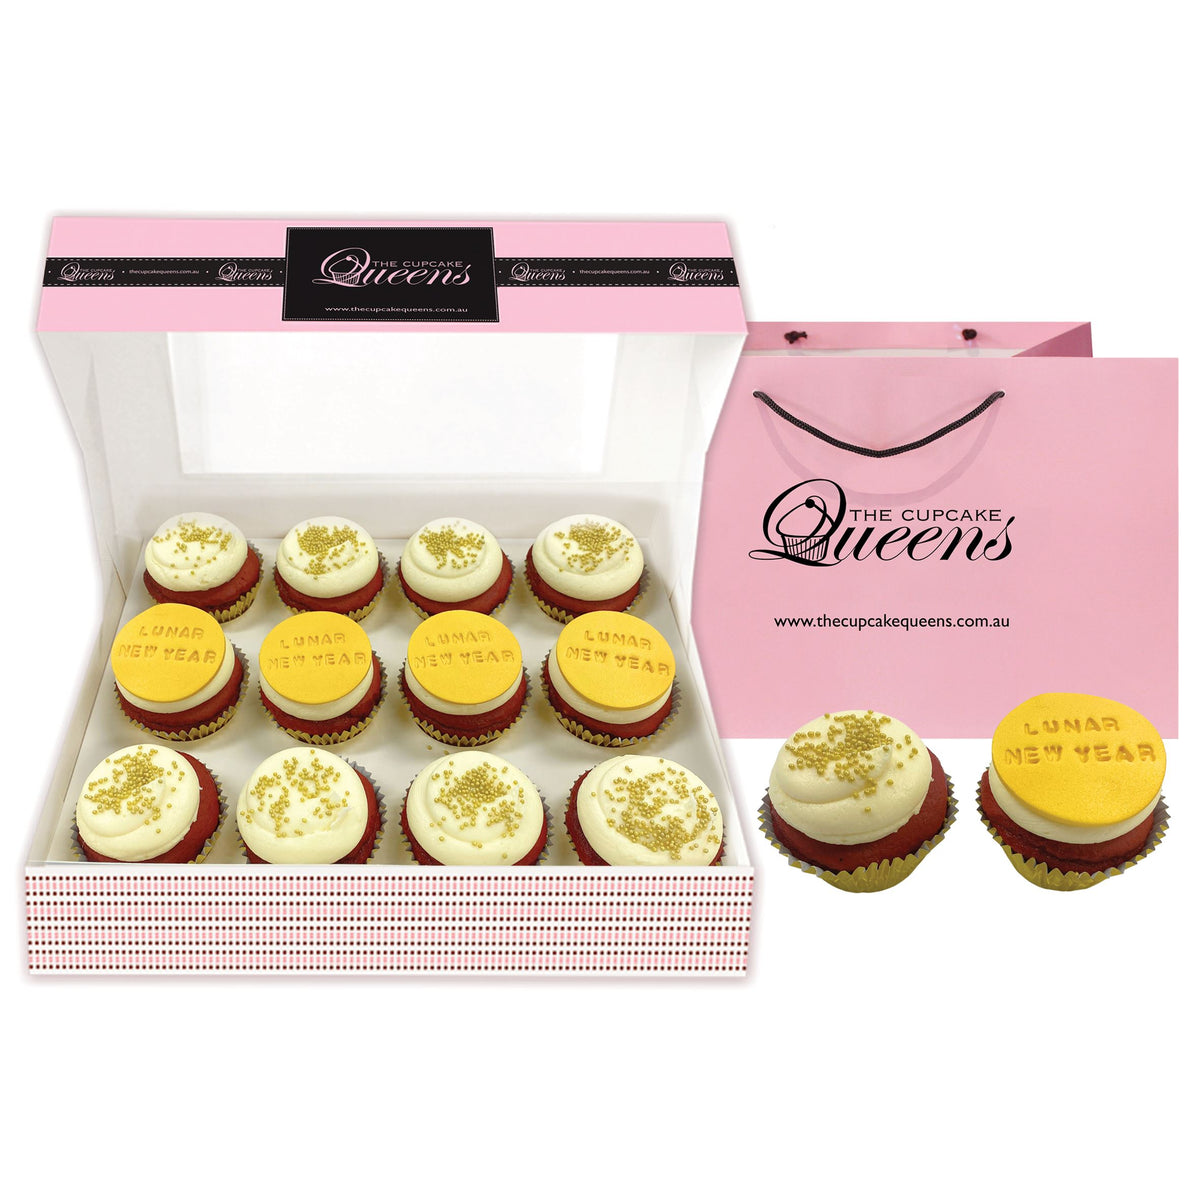 Lunar New Year GiftBox Cupcakes Pre Selected Boxes The Cupcake Queens 